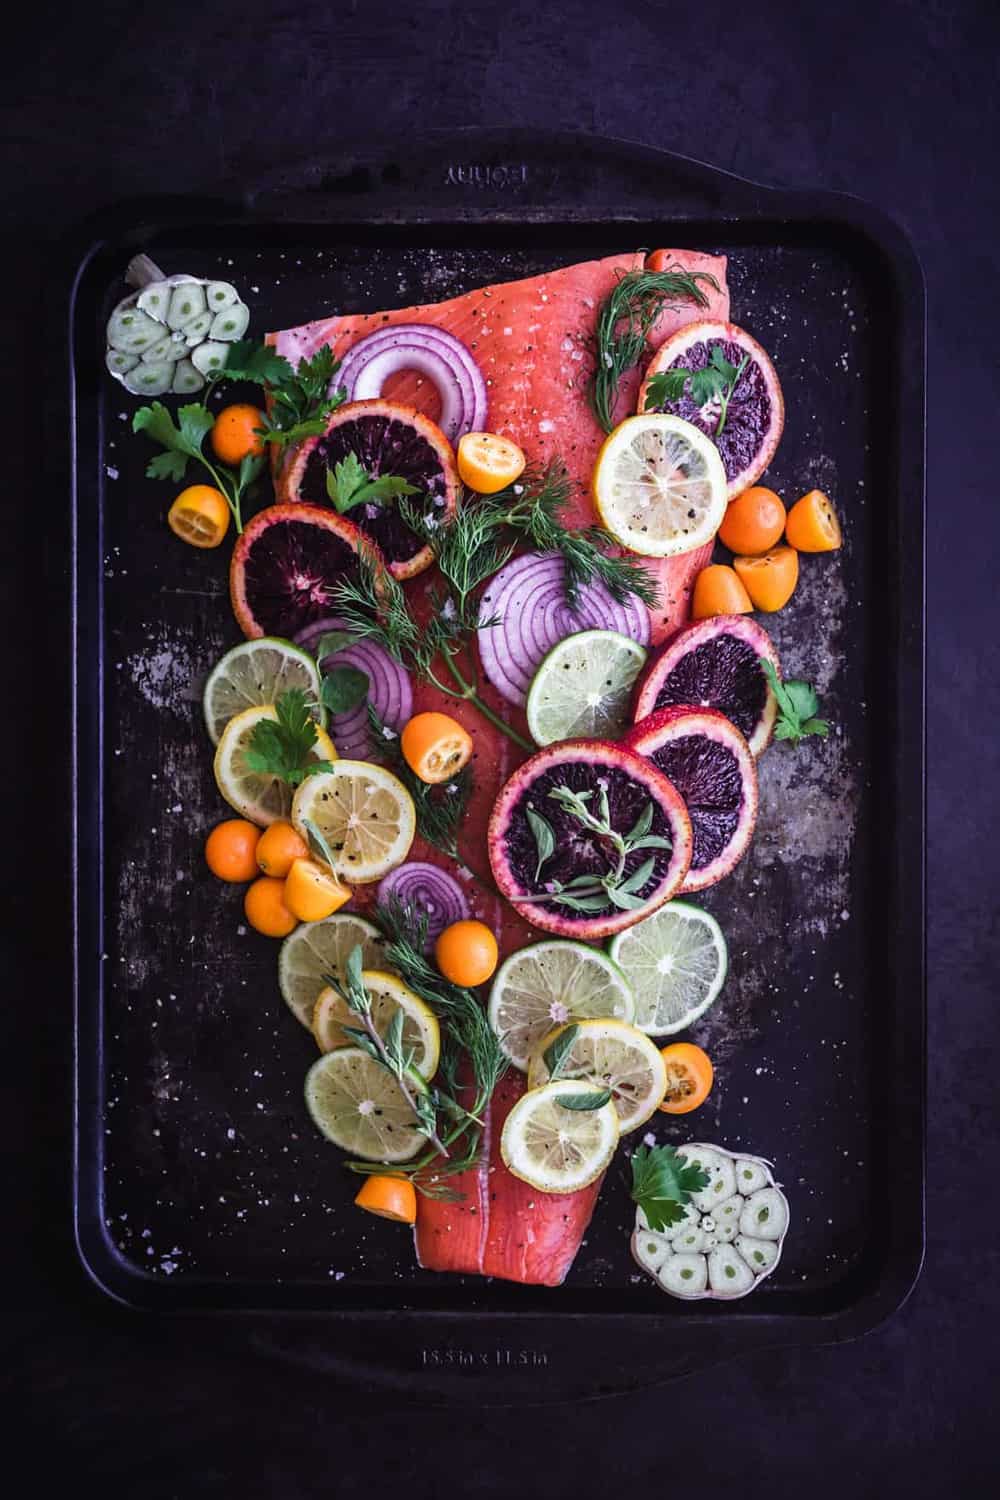 Citrus & Fresh Herb Roasted Salmon. Pre Oven with blood oranges, lemons, Meyer lemons, limes, kumquats, red onions, garlic, parsley, and dill on the salmon.